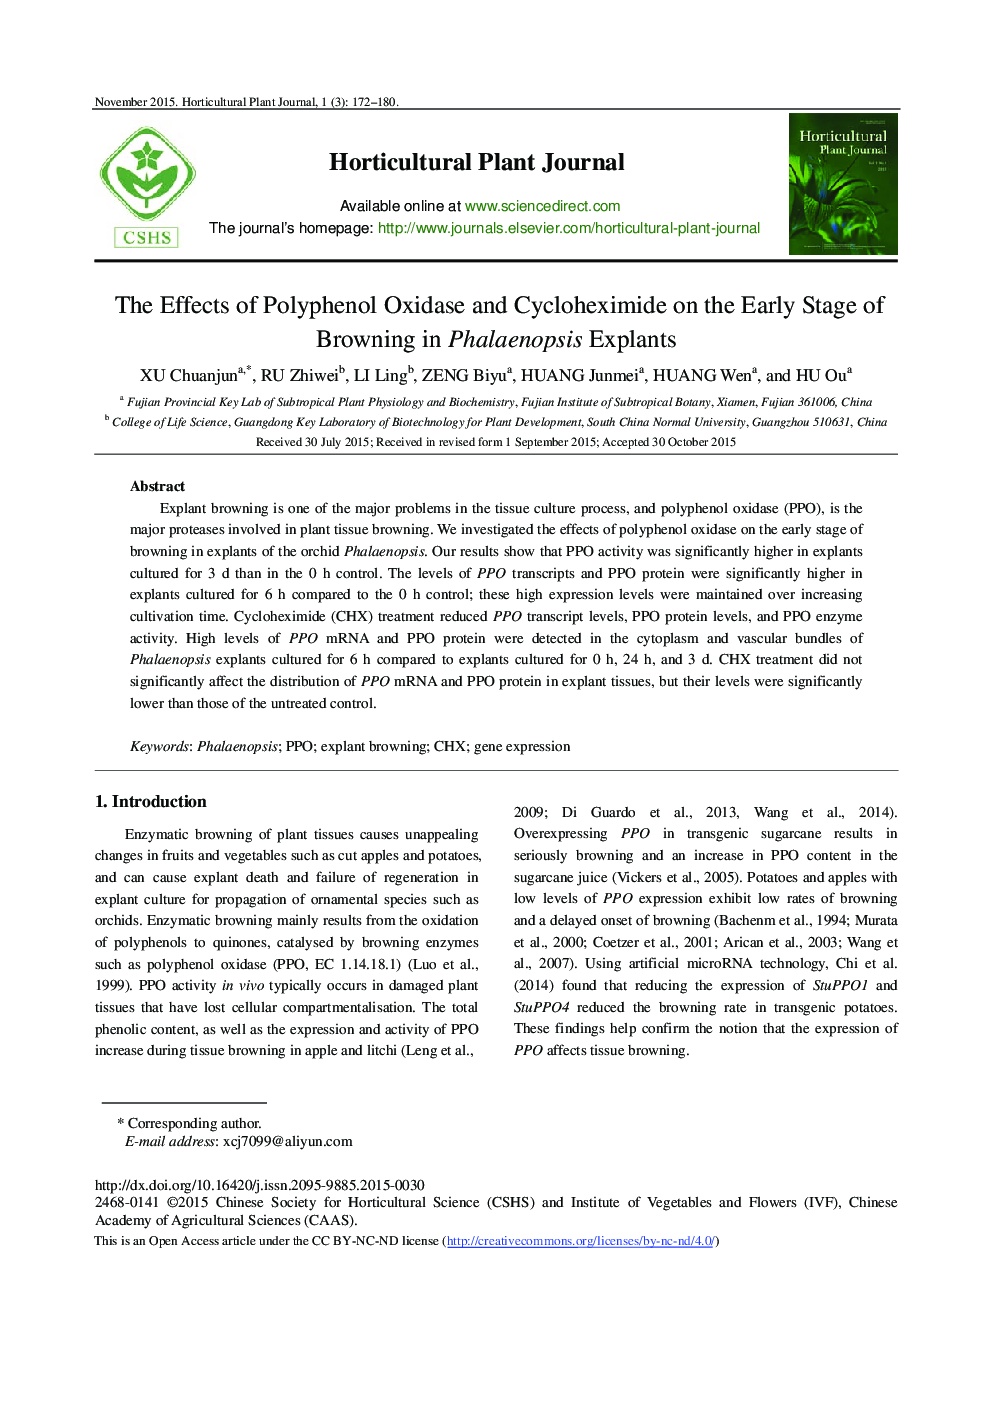 The Effects of Polyphenol Oxidase and Cycloheximide on the Early Stage of Browning in Phalaenopsis Explants